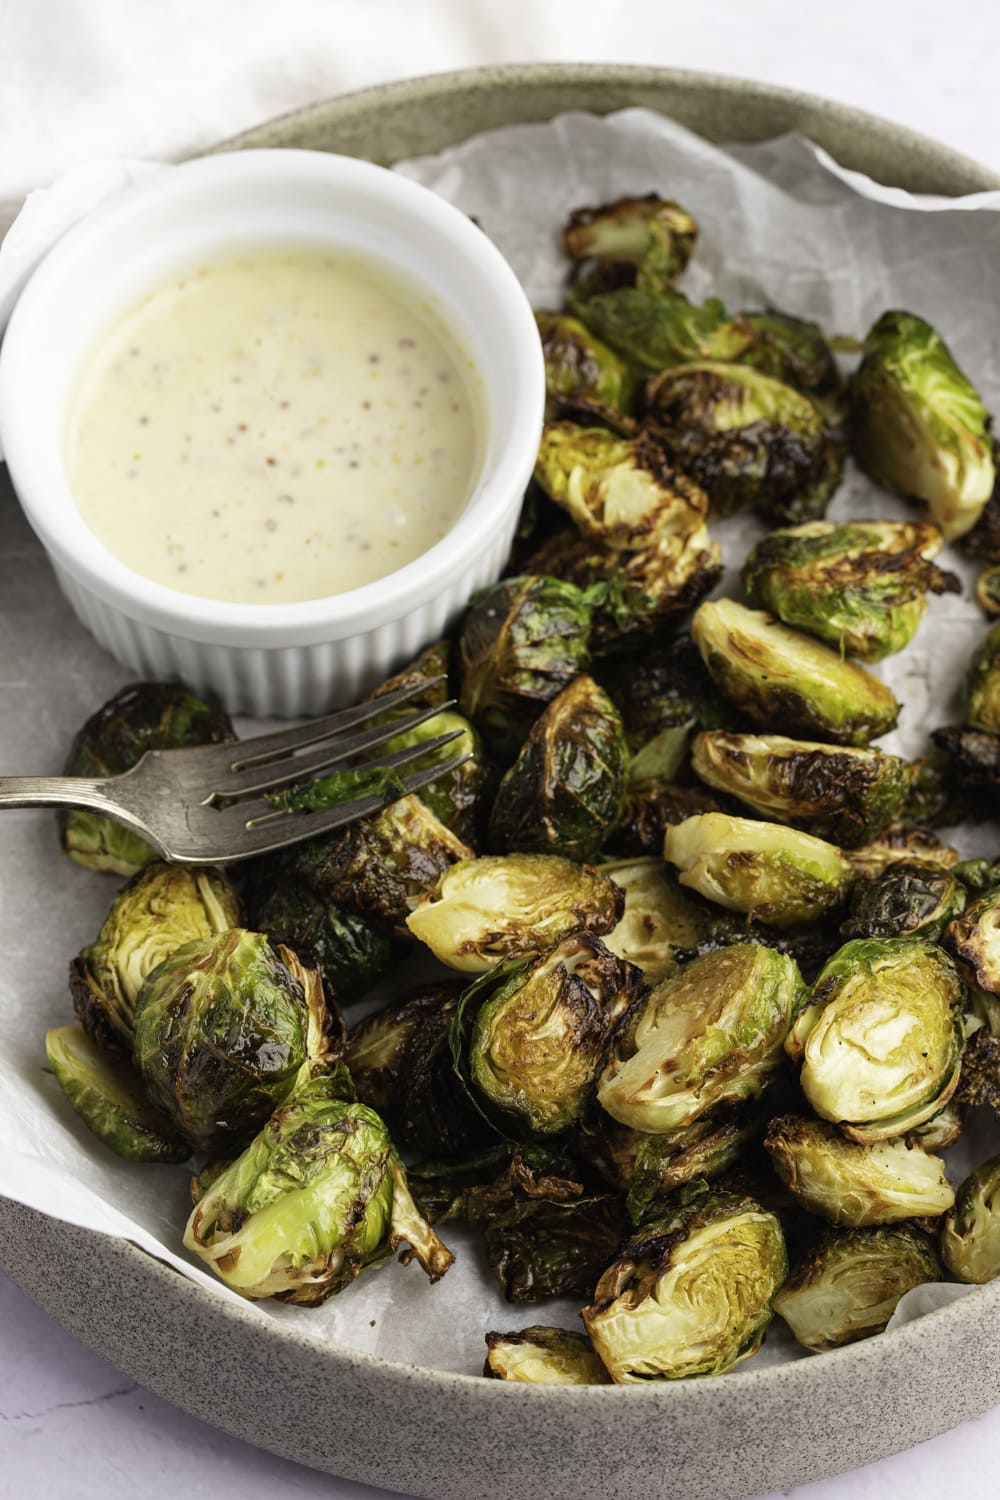 Roasted brussels sliced in halves served with a dipping sauce.